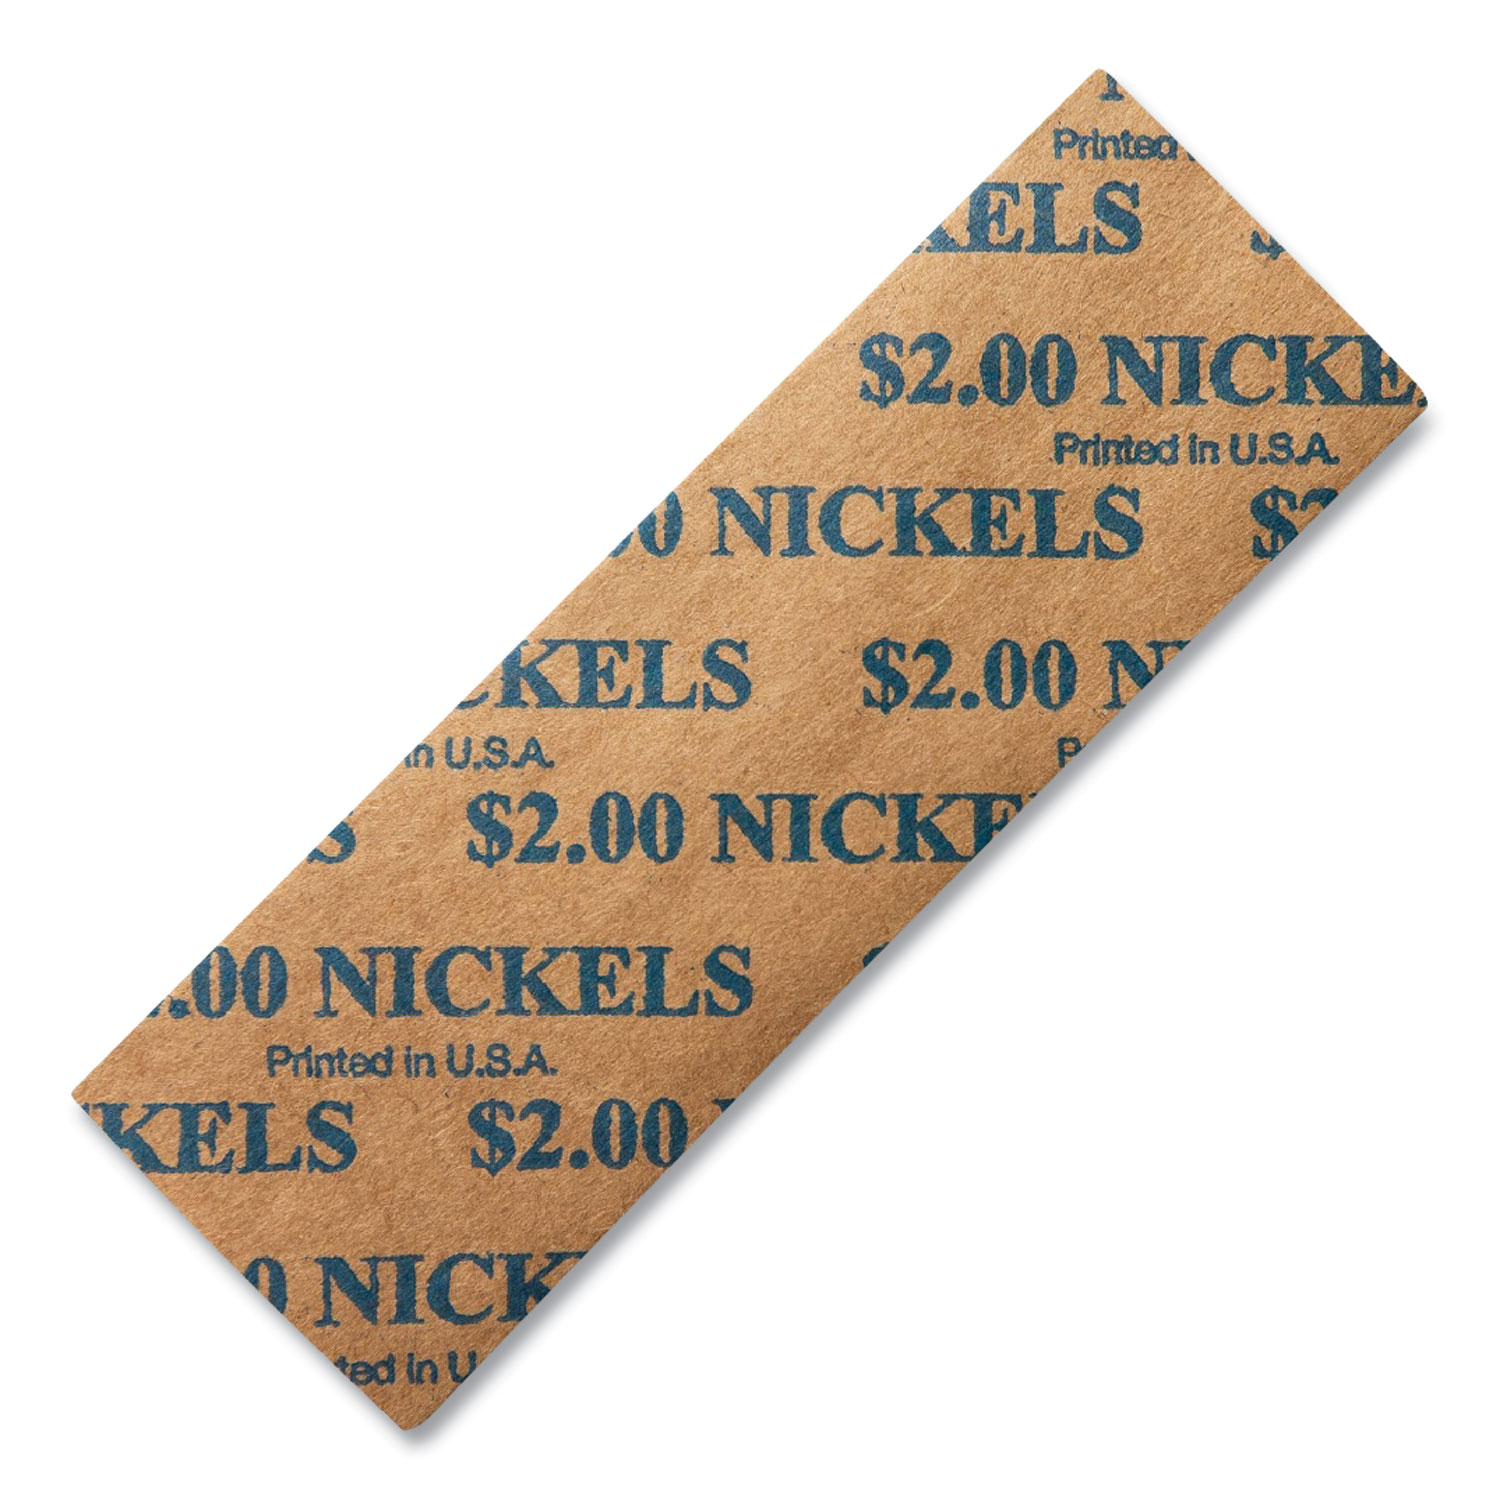  Dunbar Security Products 2NF Flat Coin Wrappers, Nickels, $2, 1000 Wrappers/Box (DBR24392477) 